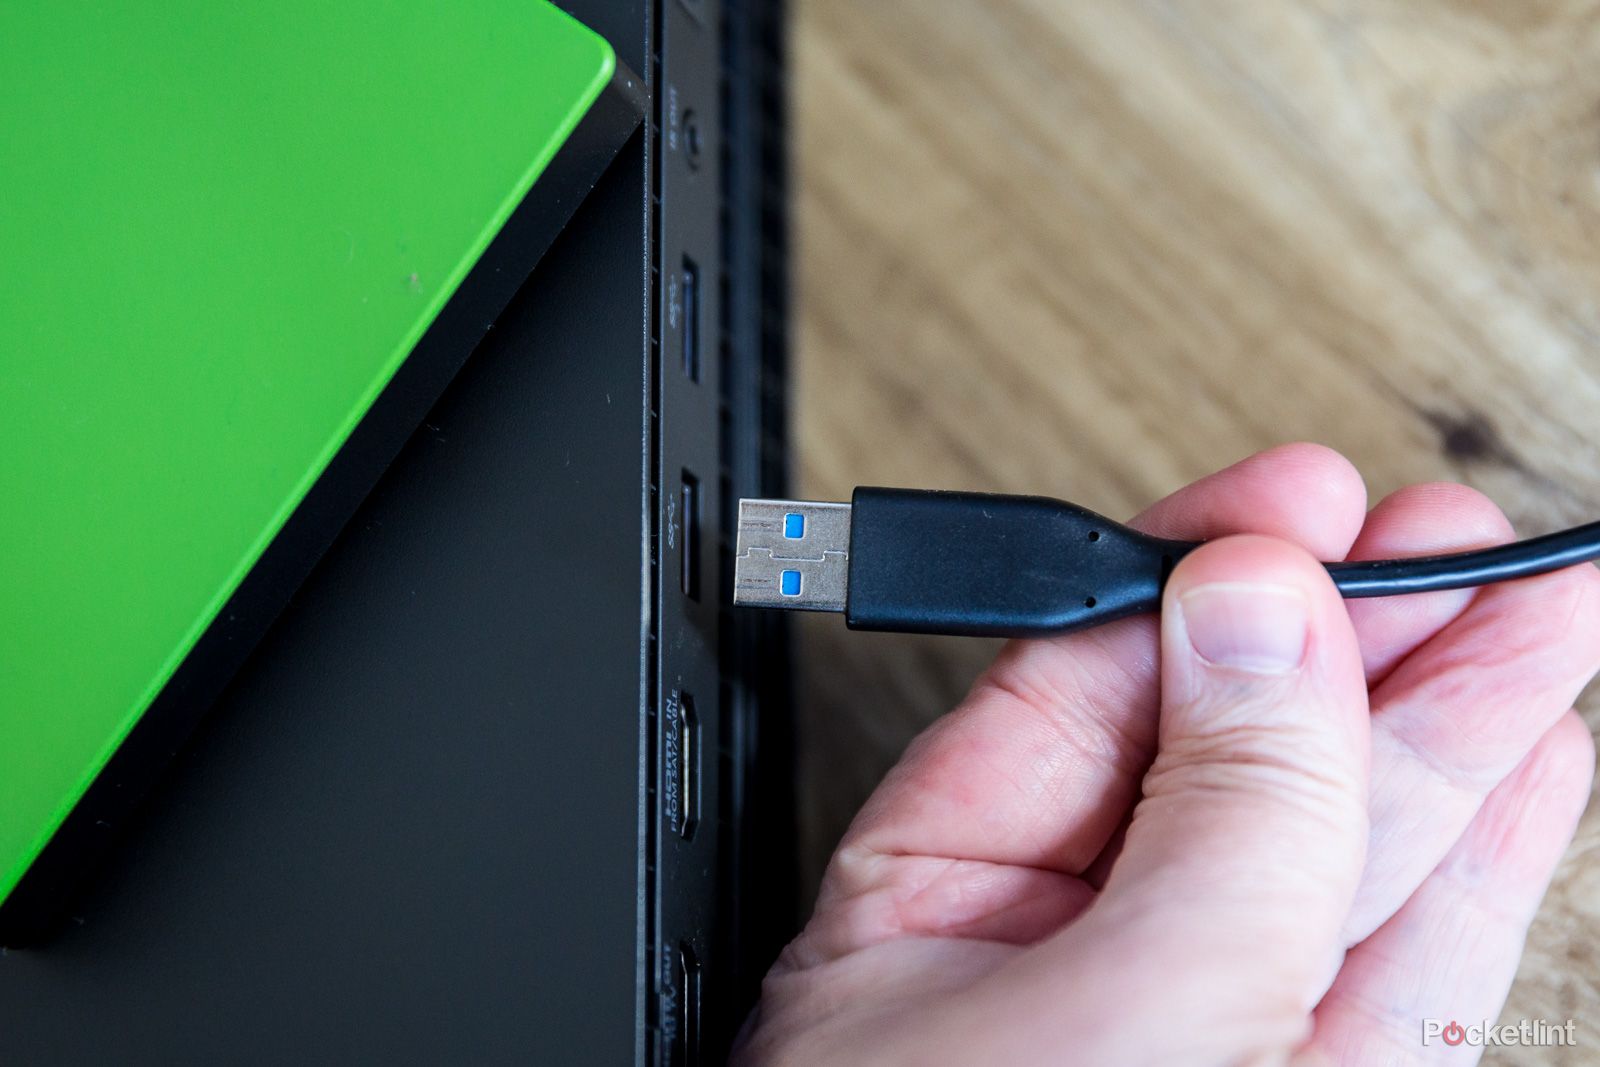 How To Upgrade Your Xbox One Storage By 2tb And More Thats Up To 100 Additional Games image 4